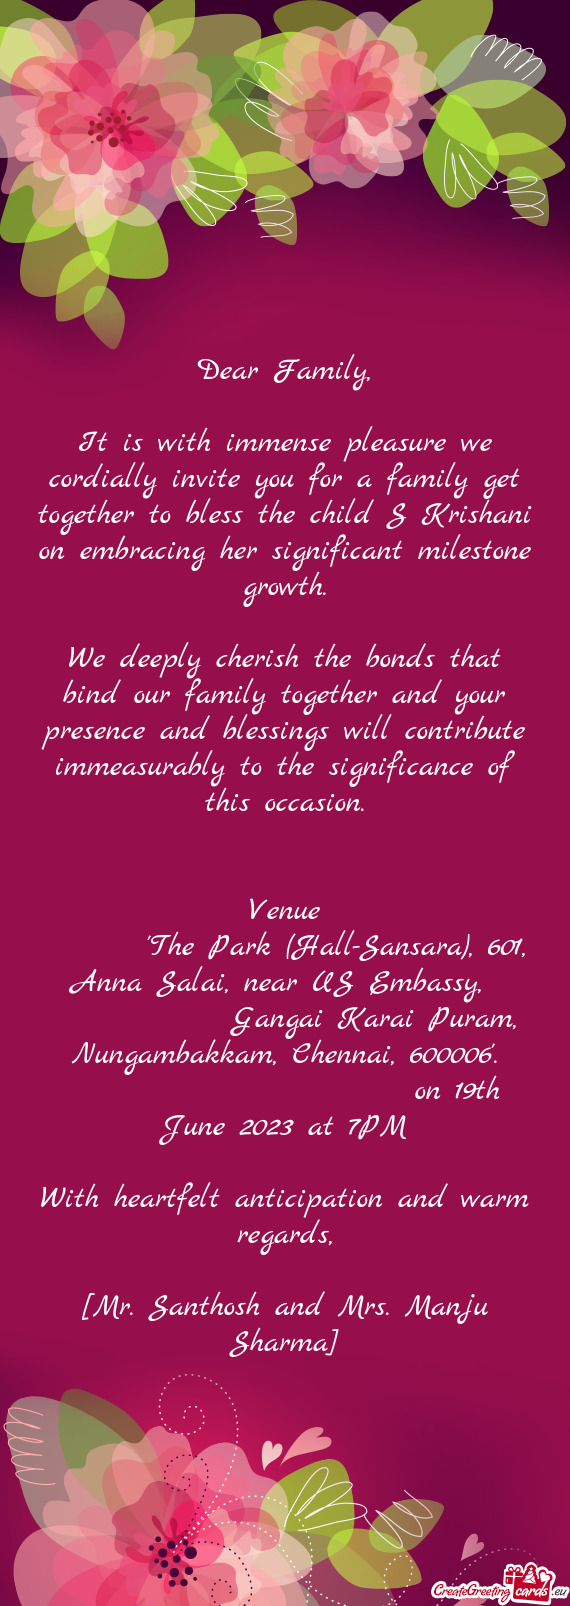 It is with immense pleasure we cordially invite you for a family get together to bless the child S K